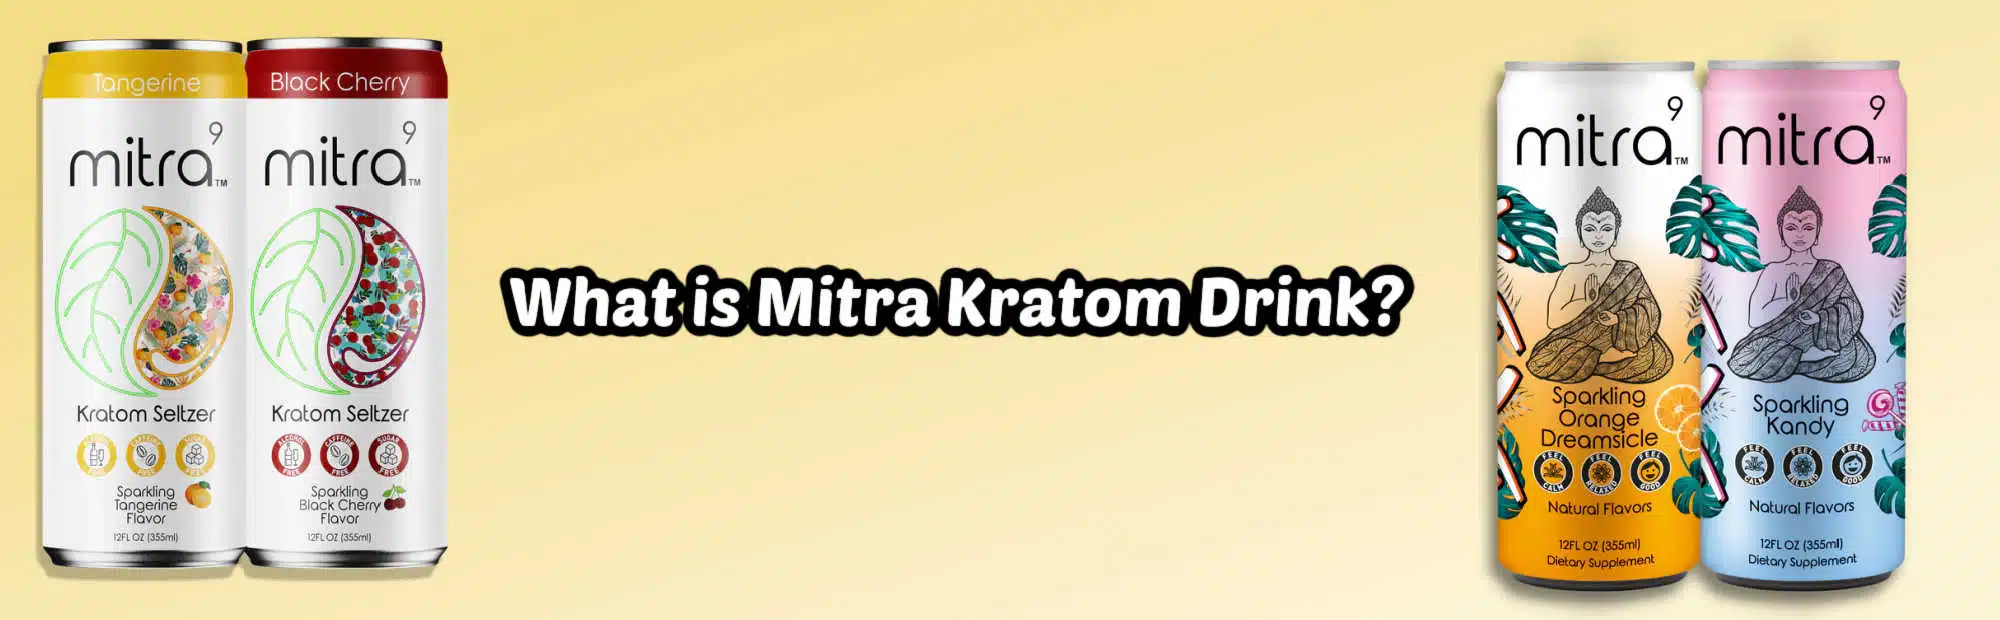 "What is mitra kratom drink?" banner